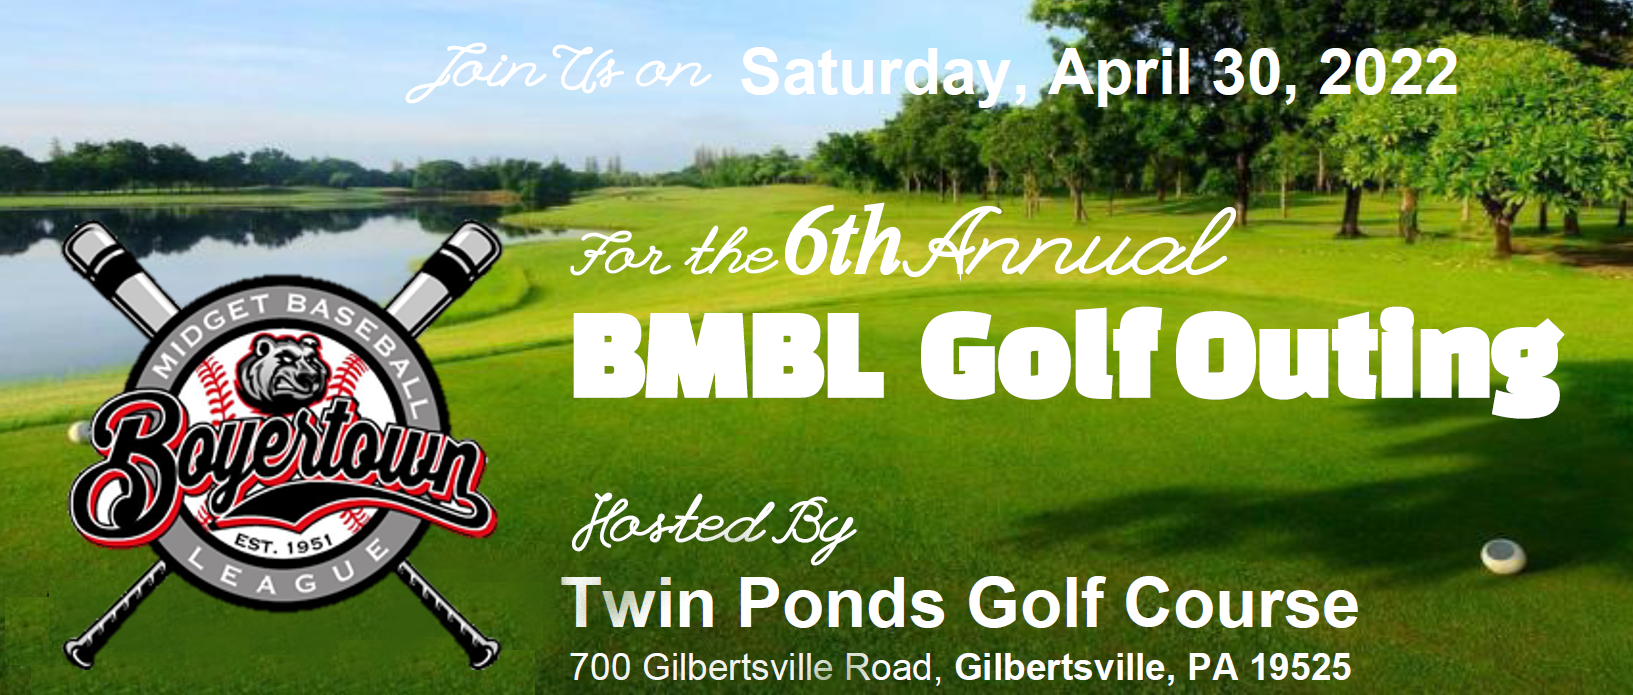 BMBL golf outing